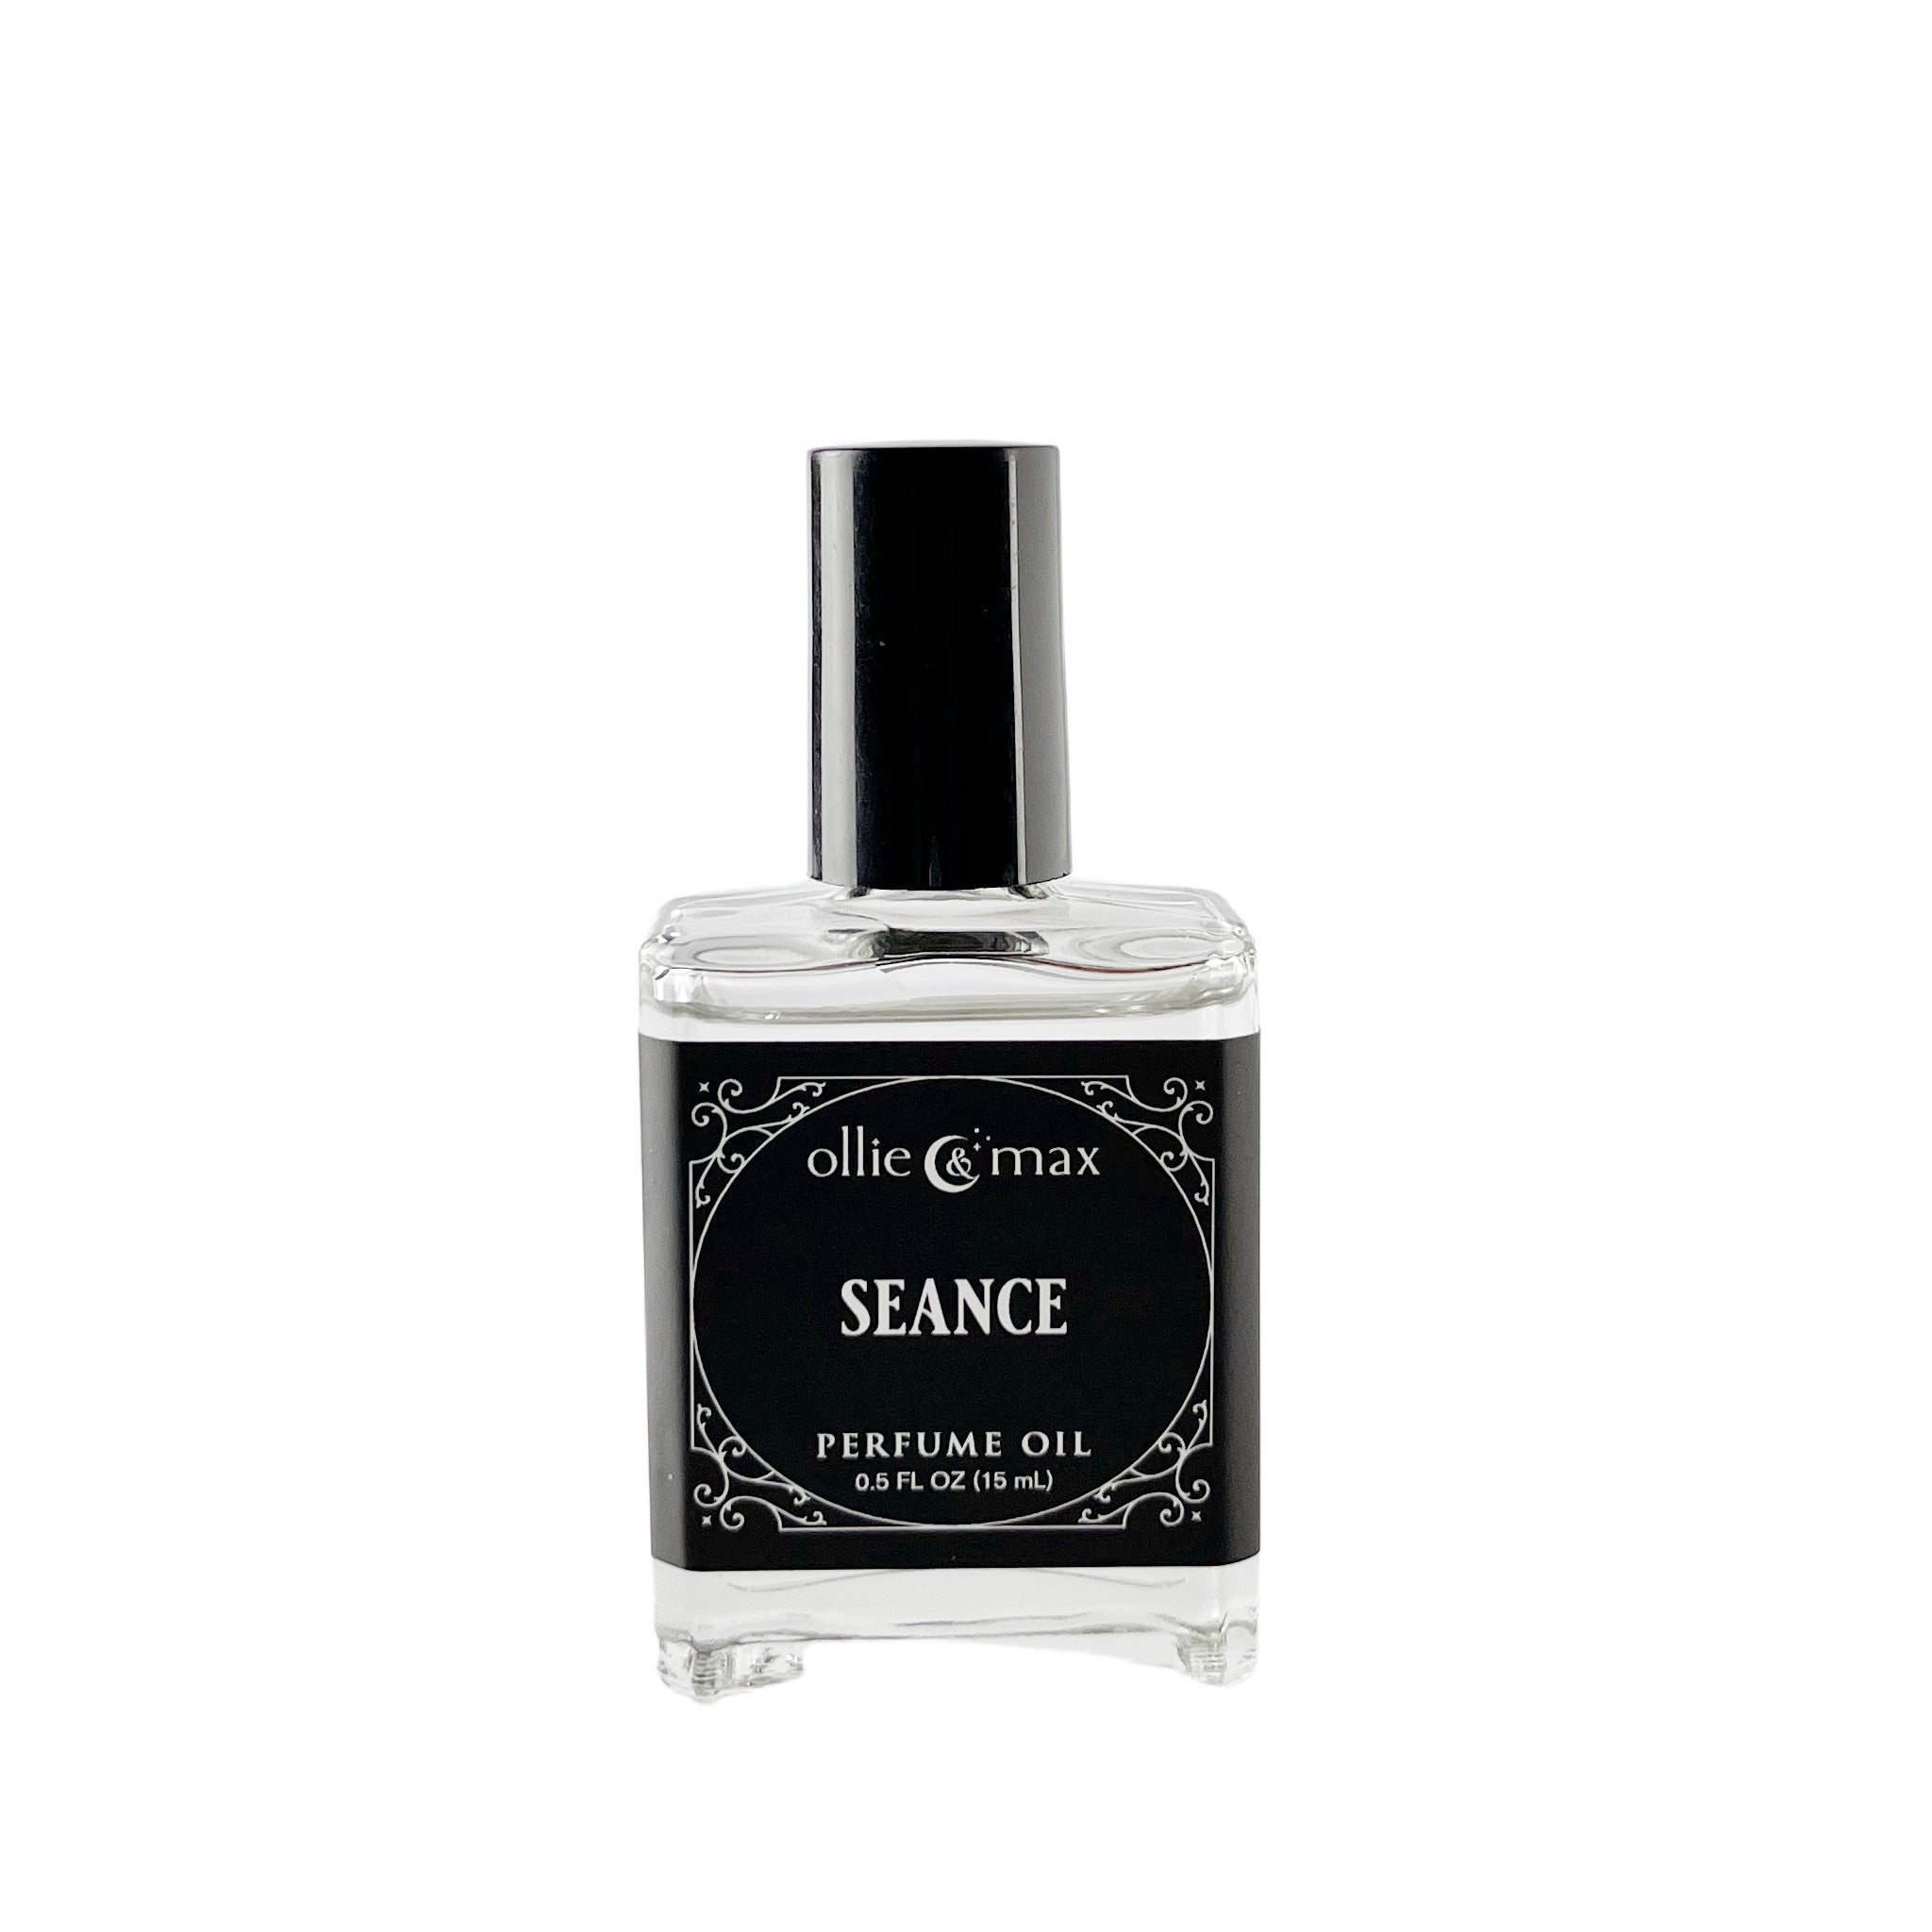 rectangle glass bottle with black cap and label, seance perfume oil, 15ml